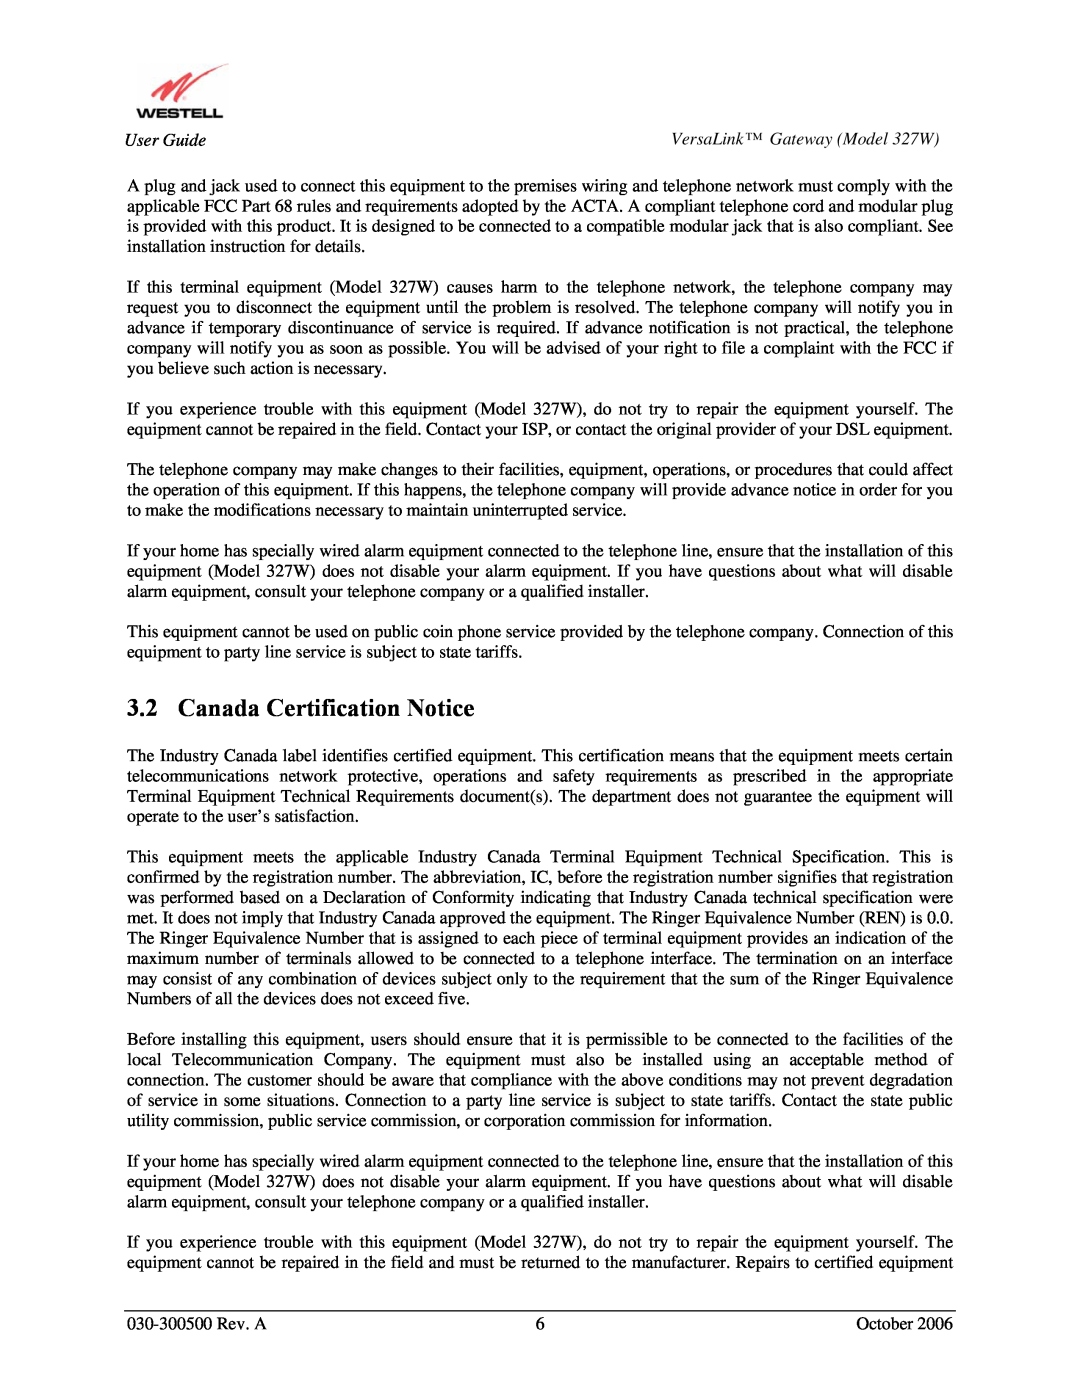 Westell Technologies 327W manual Canada Certification Notice 